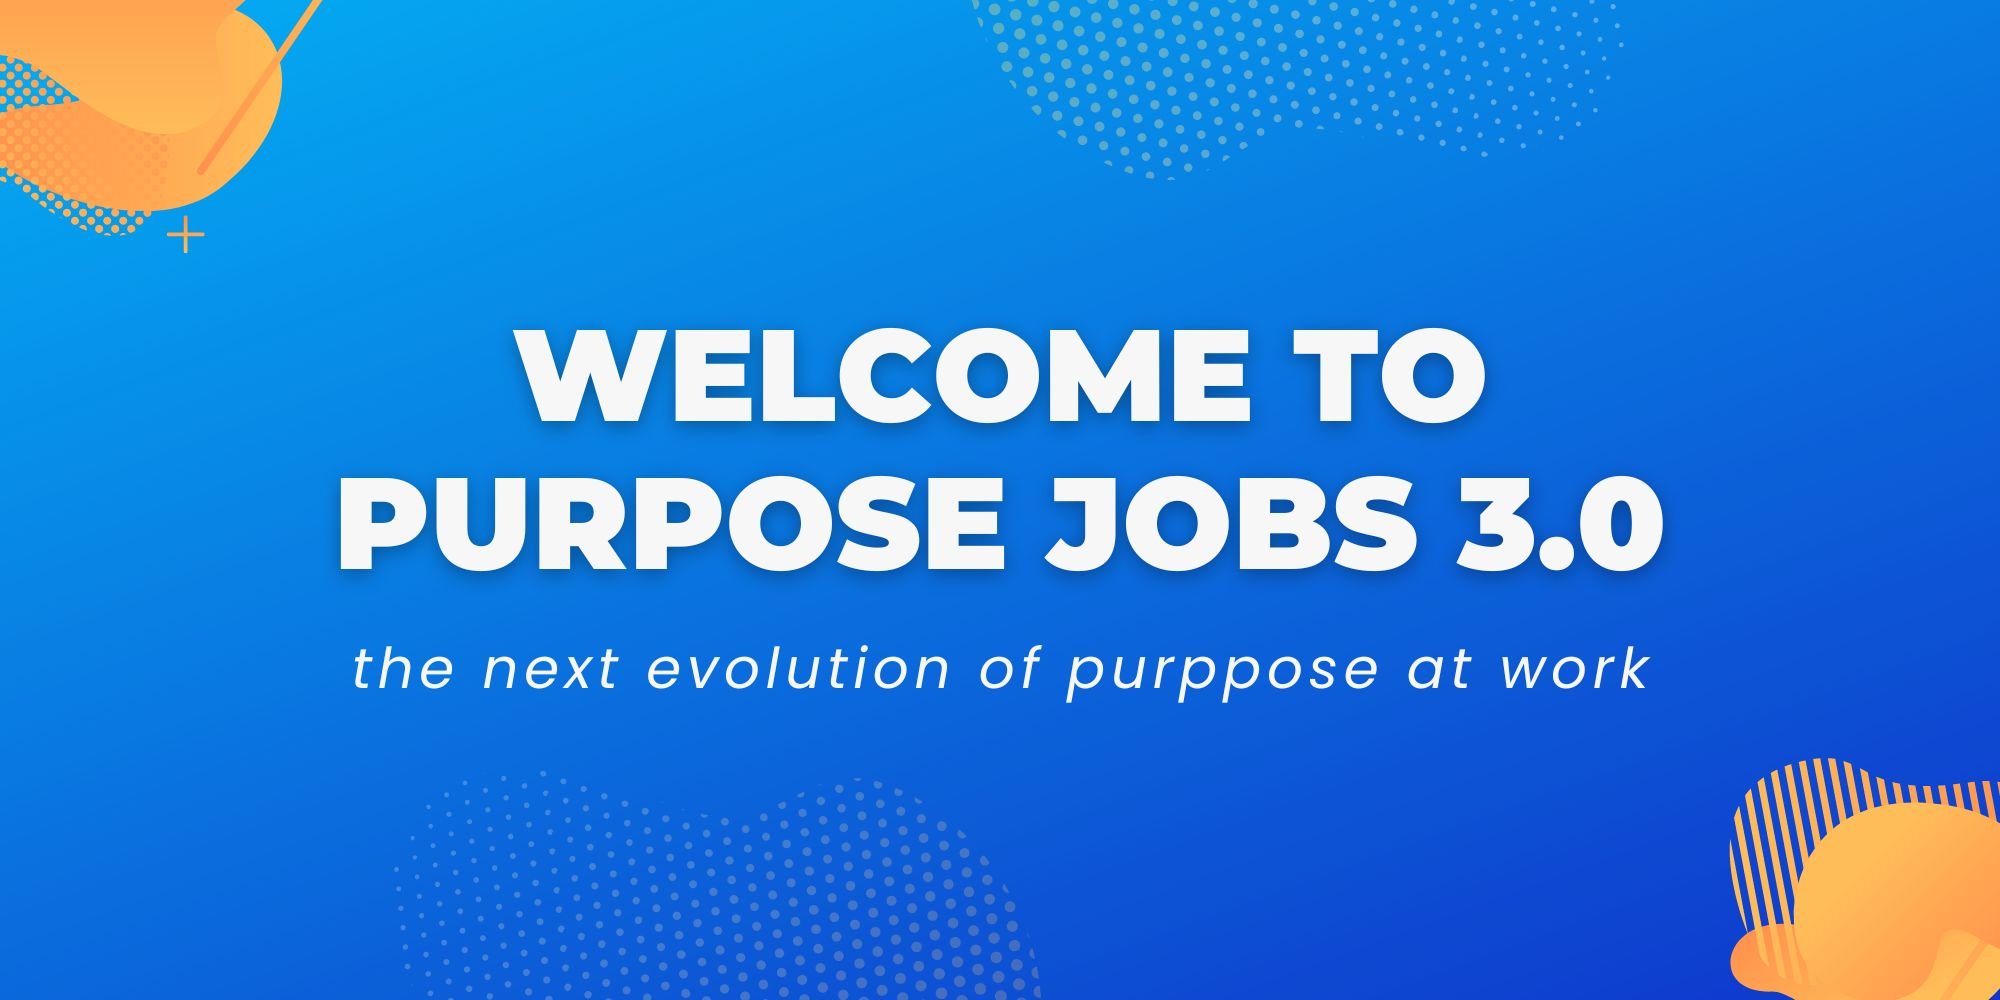 Welcome to Purpose Jobs 3.0